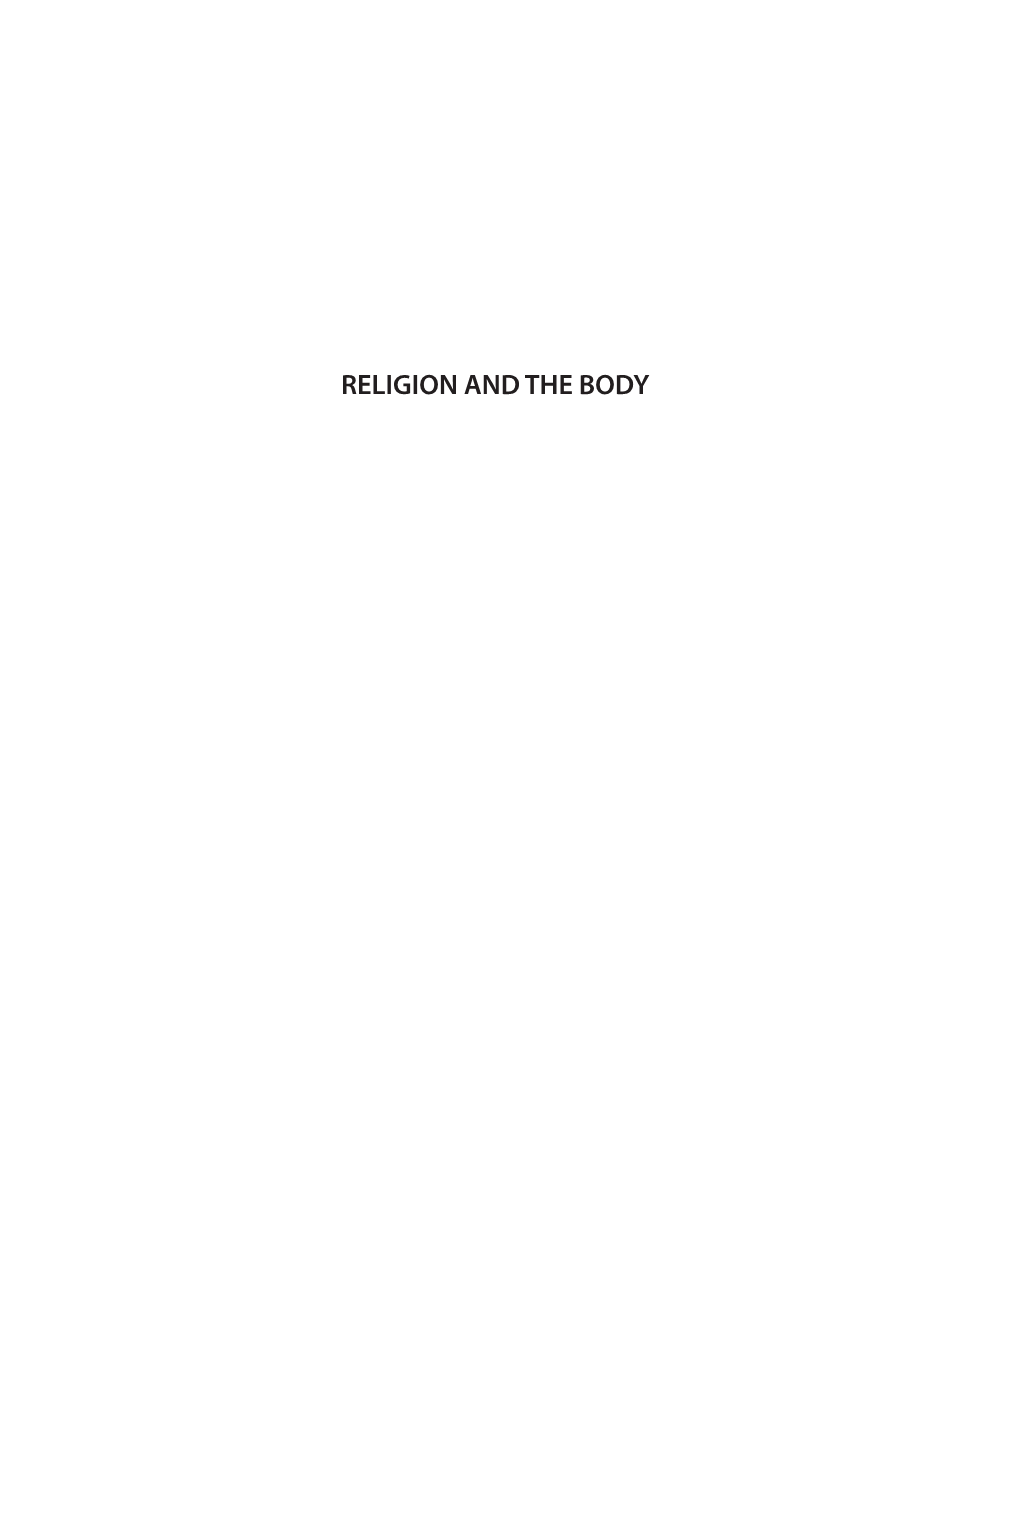 Religion and the Body